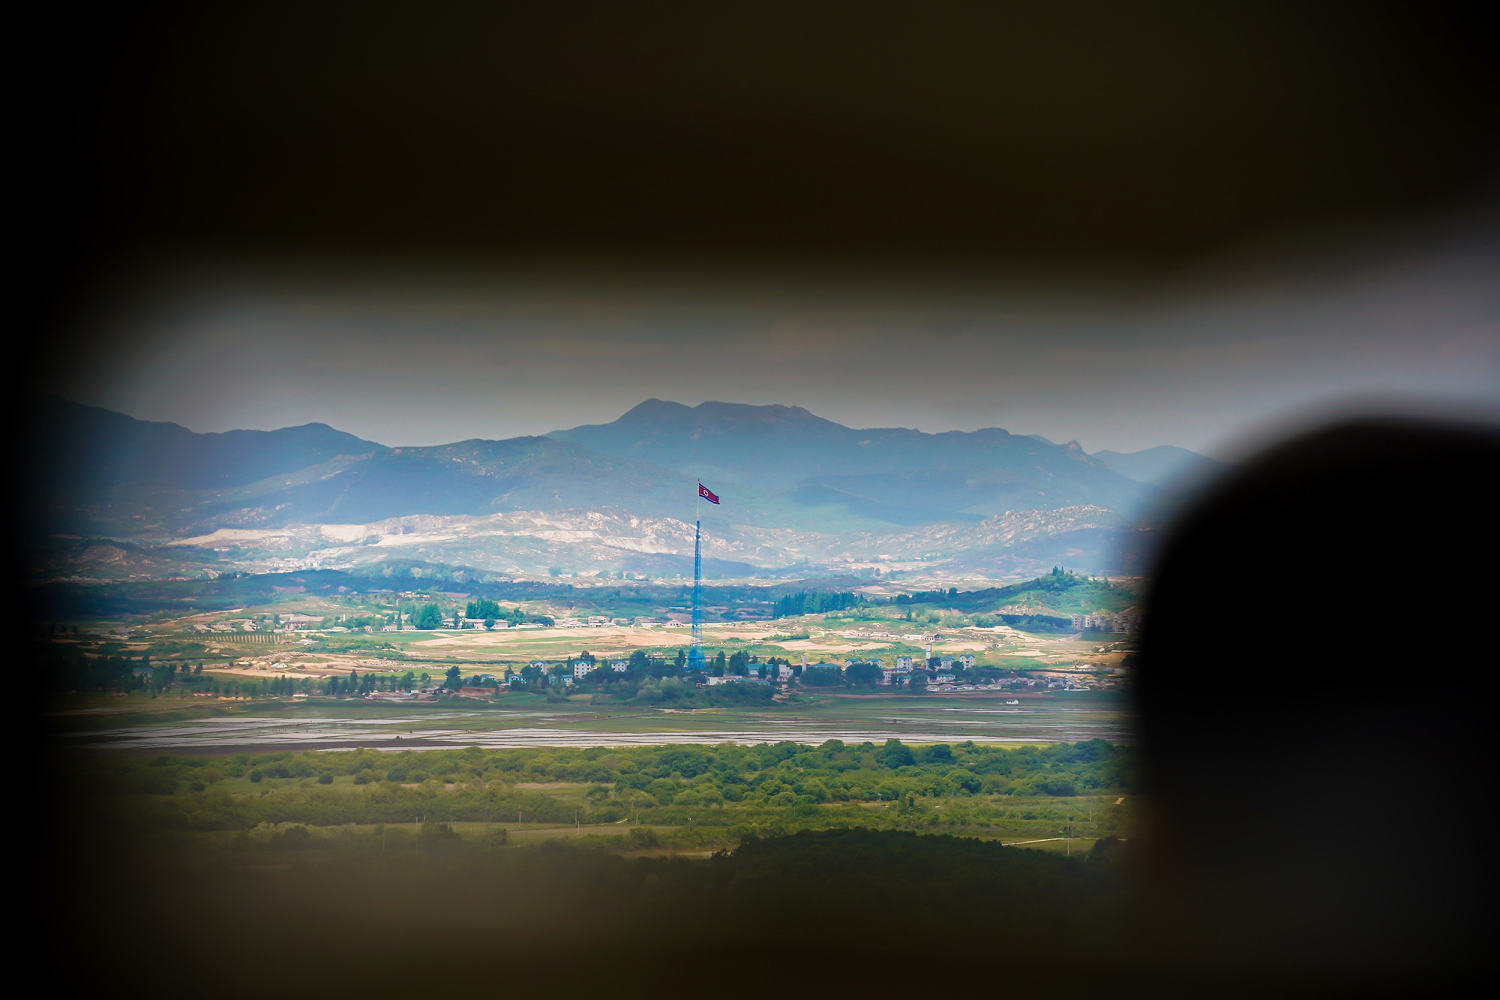 Life in the DMZ is getting more tense for the soldiers monitoring North and South Korea’s fragile peace